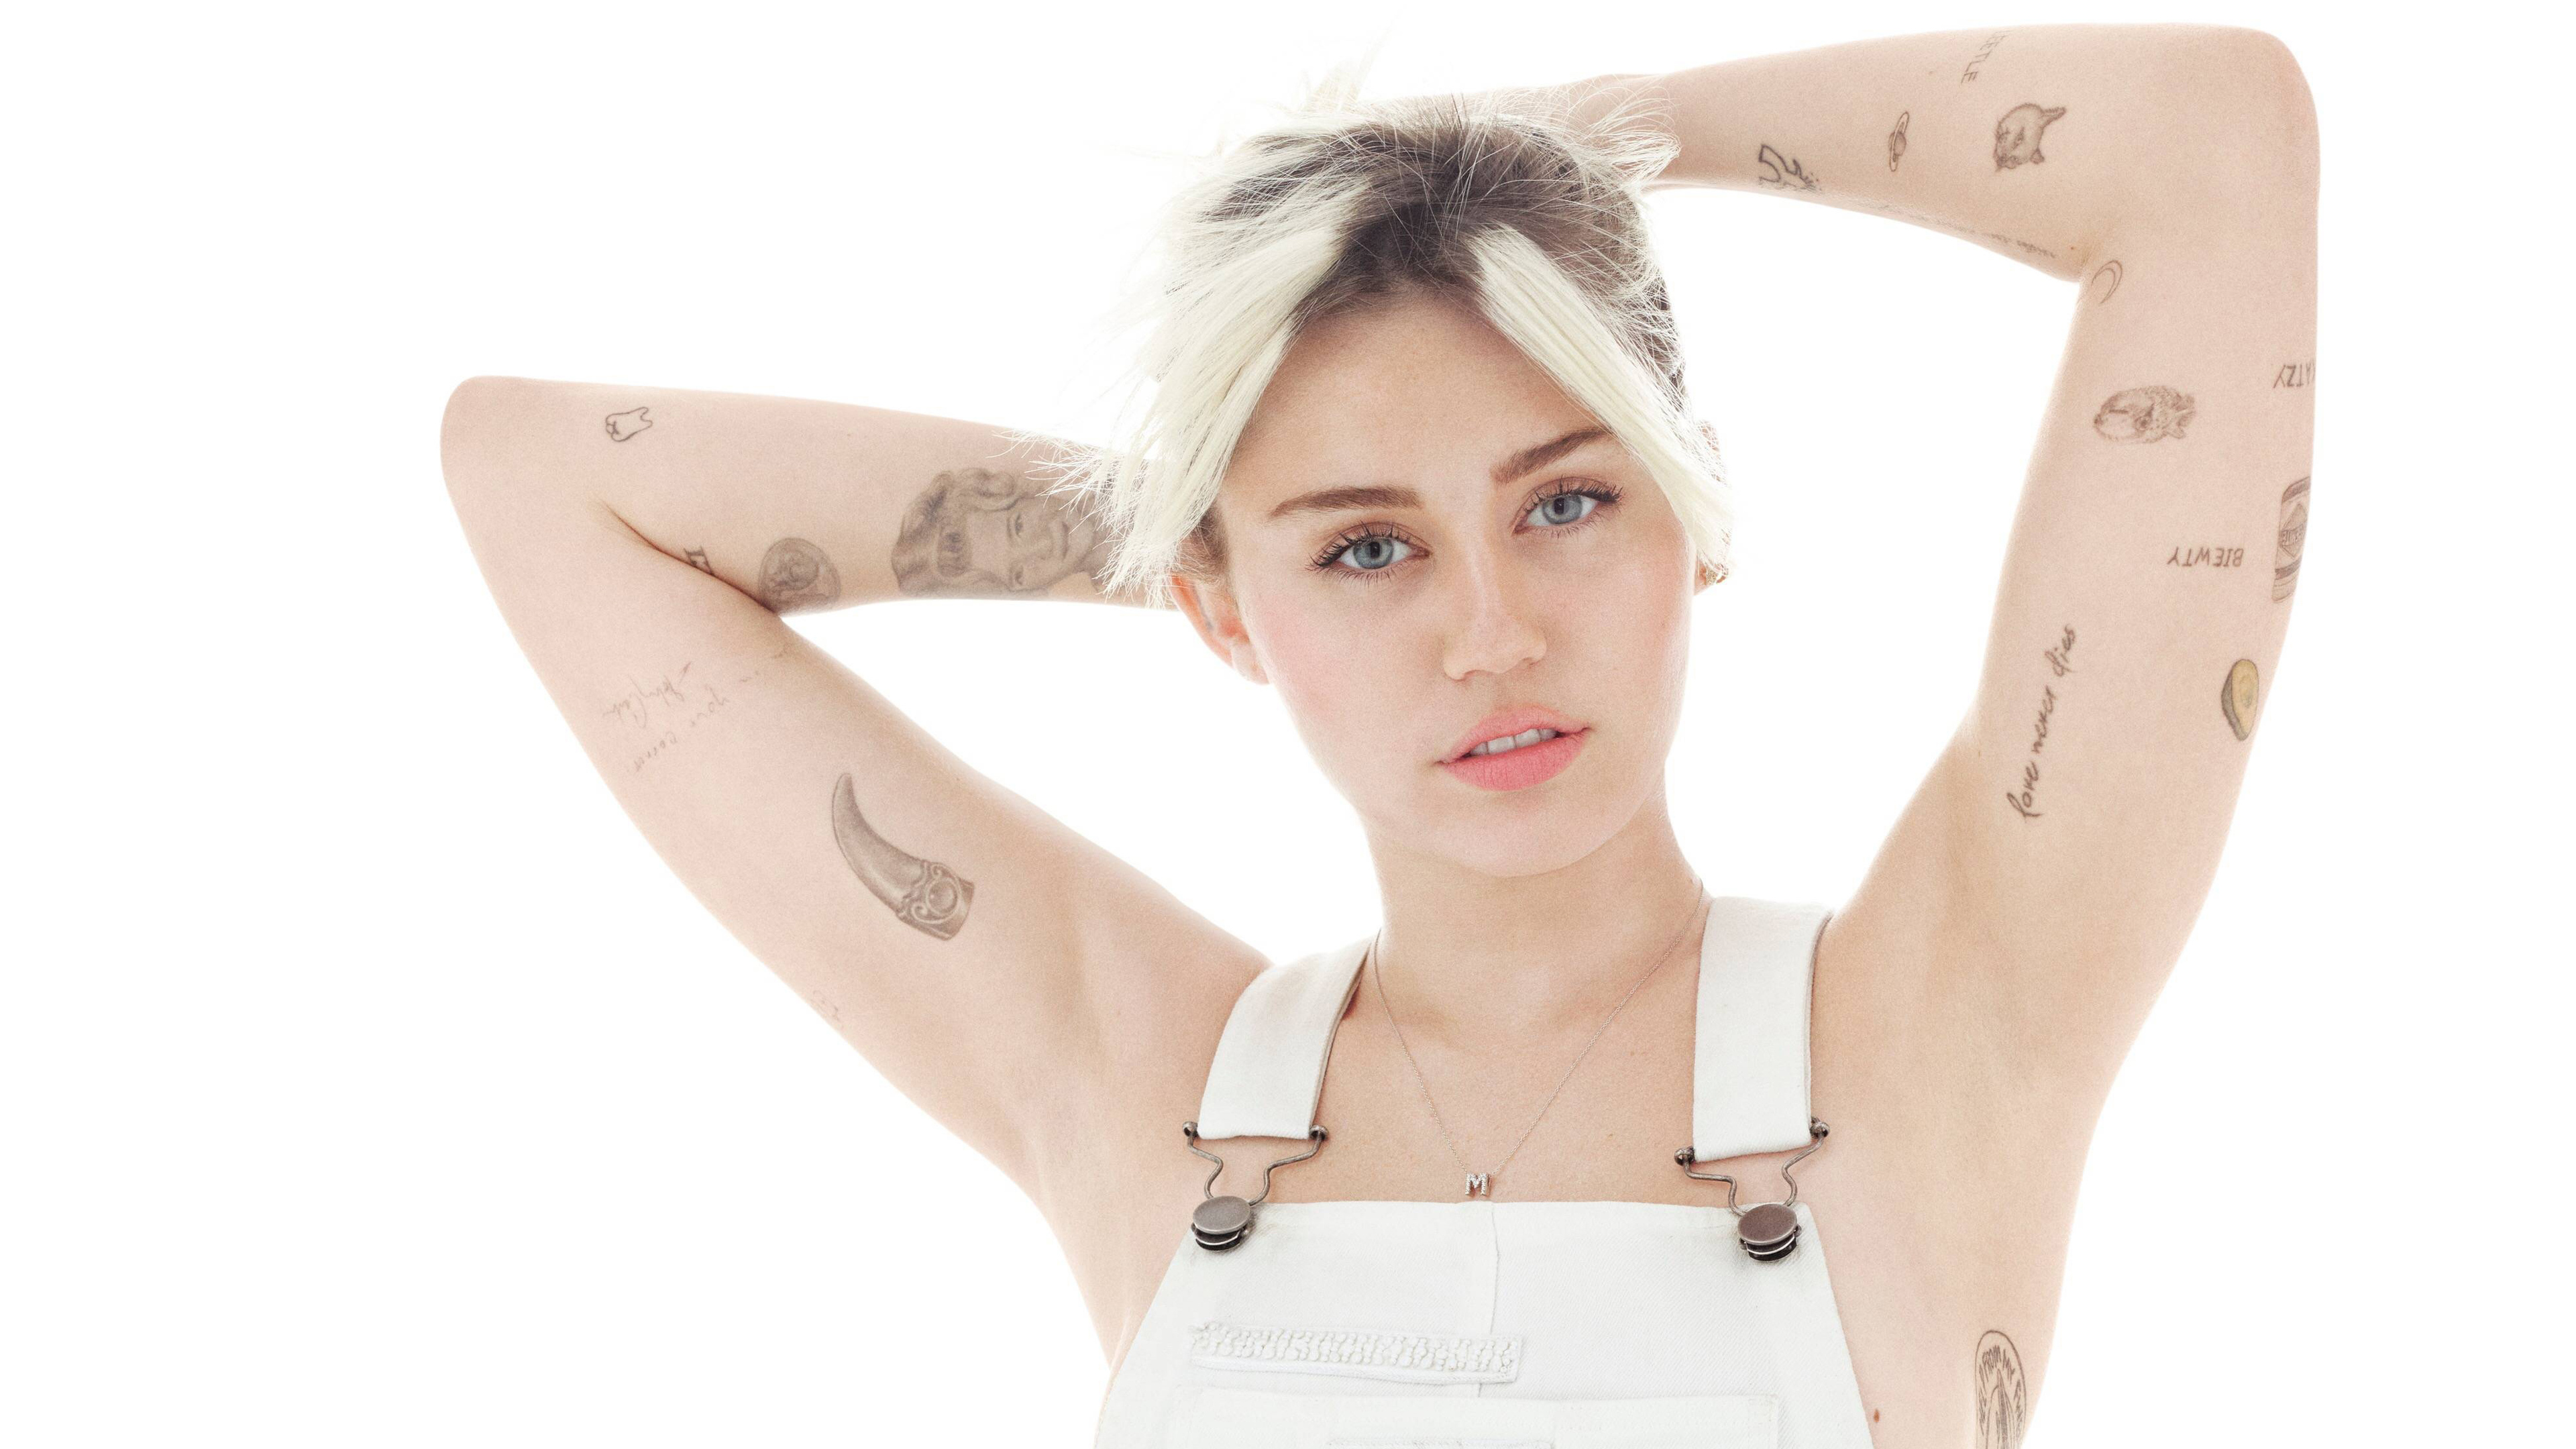 miley cyrus 2019 4k new 1558220766 - Miley Cyrus 2019 4k New - music wallpapers, miley cyrus wallpapers, hd-wallpapers, girls wallpapers, celebrities wallpapers, 4k-wallpapers